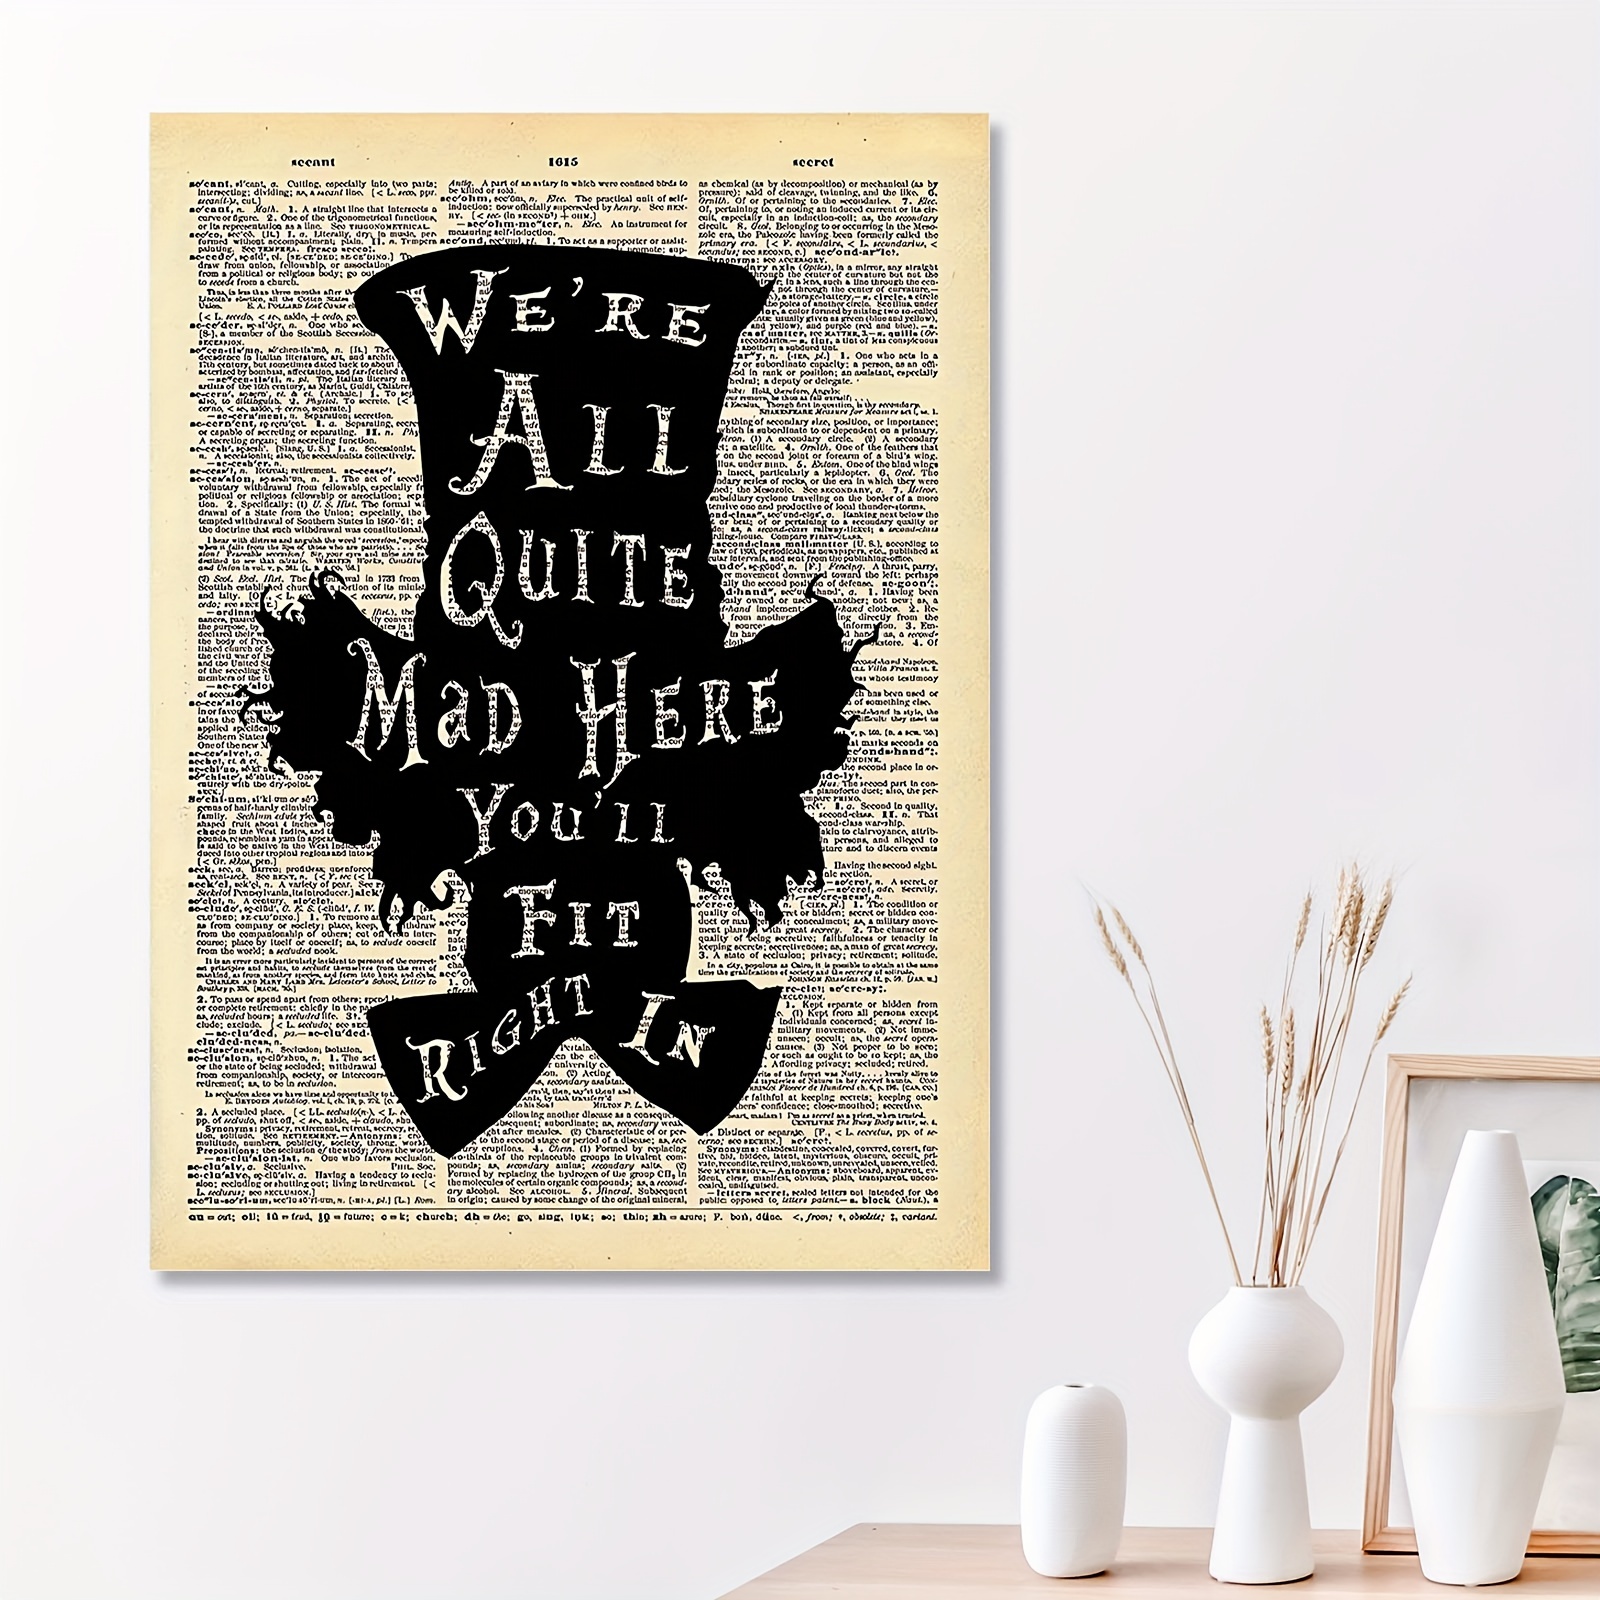 Alice in Wonderland Quote,Cheshire Cat,Vintage Dictionary Art Tote Bag